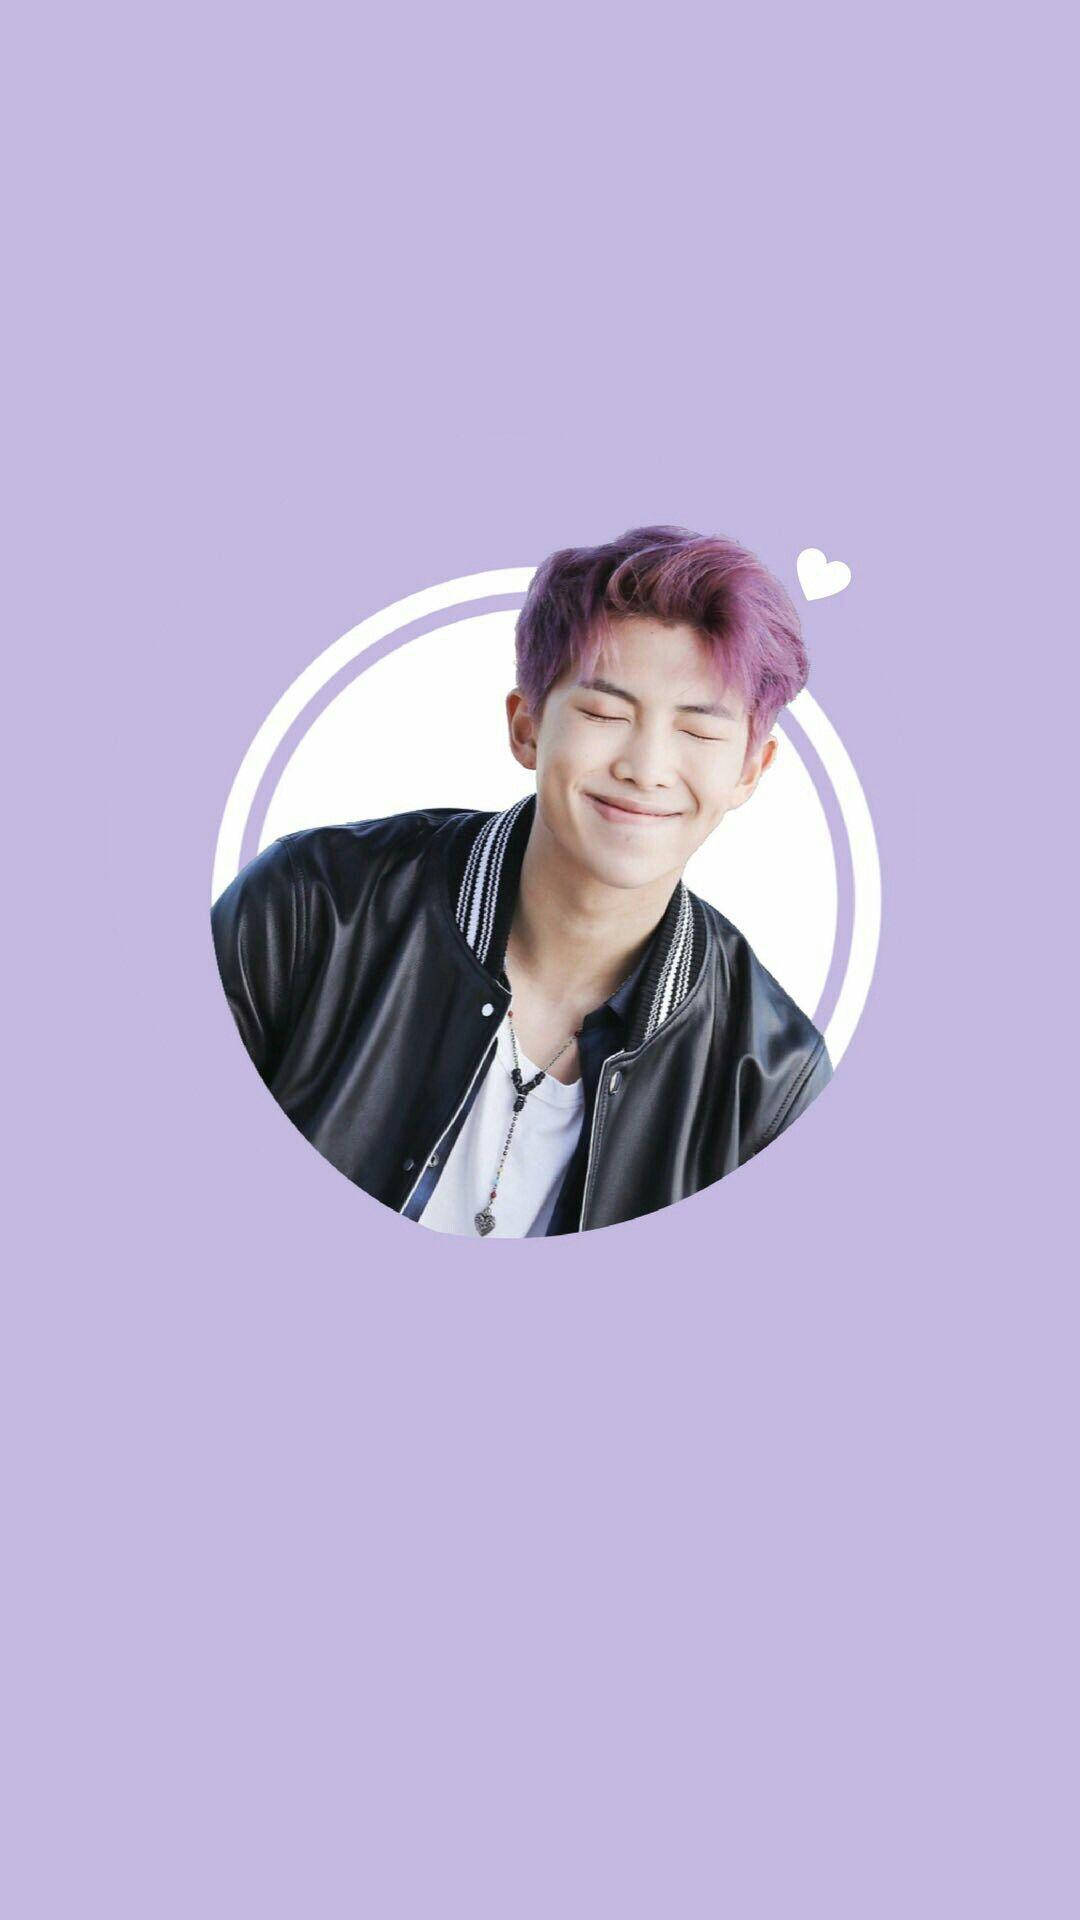 Cute Bts Rm In Circle On Purple